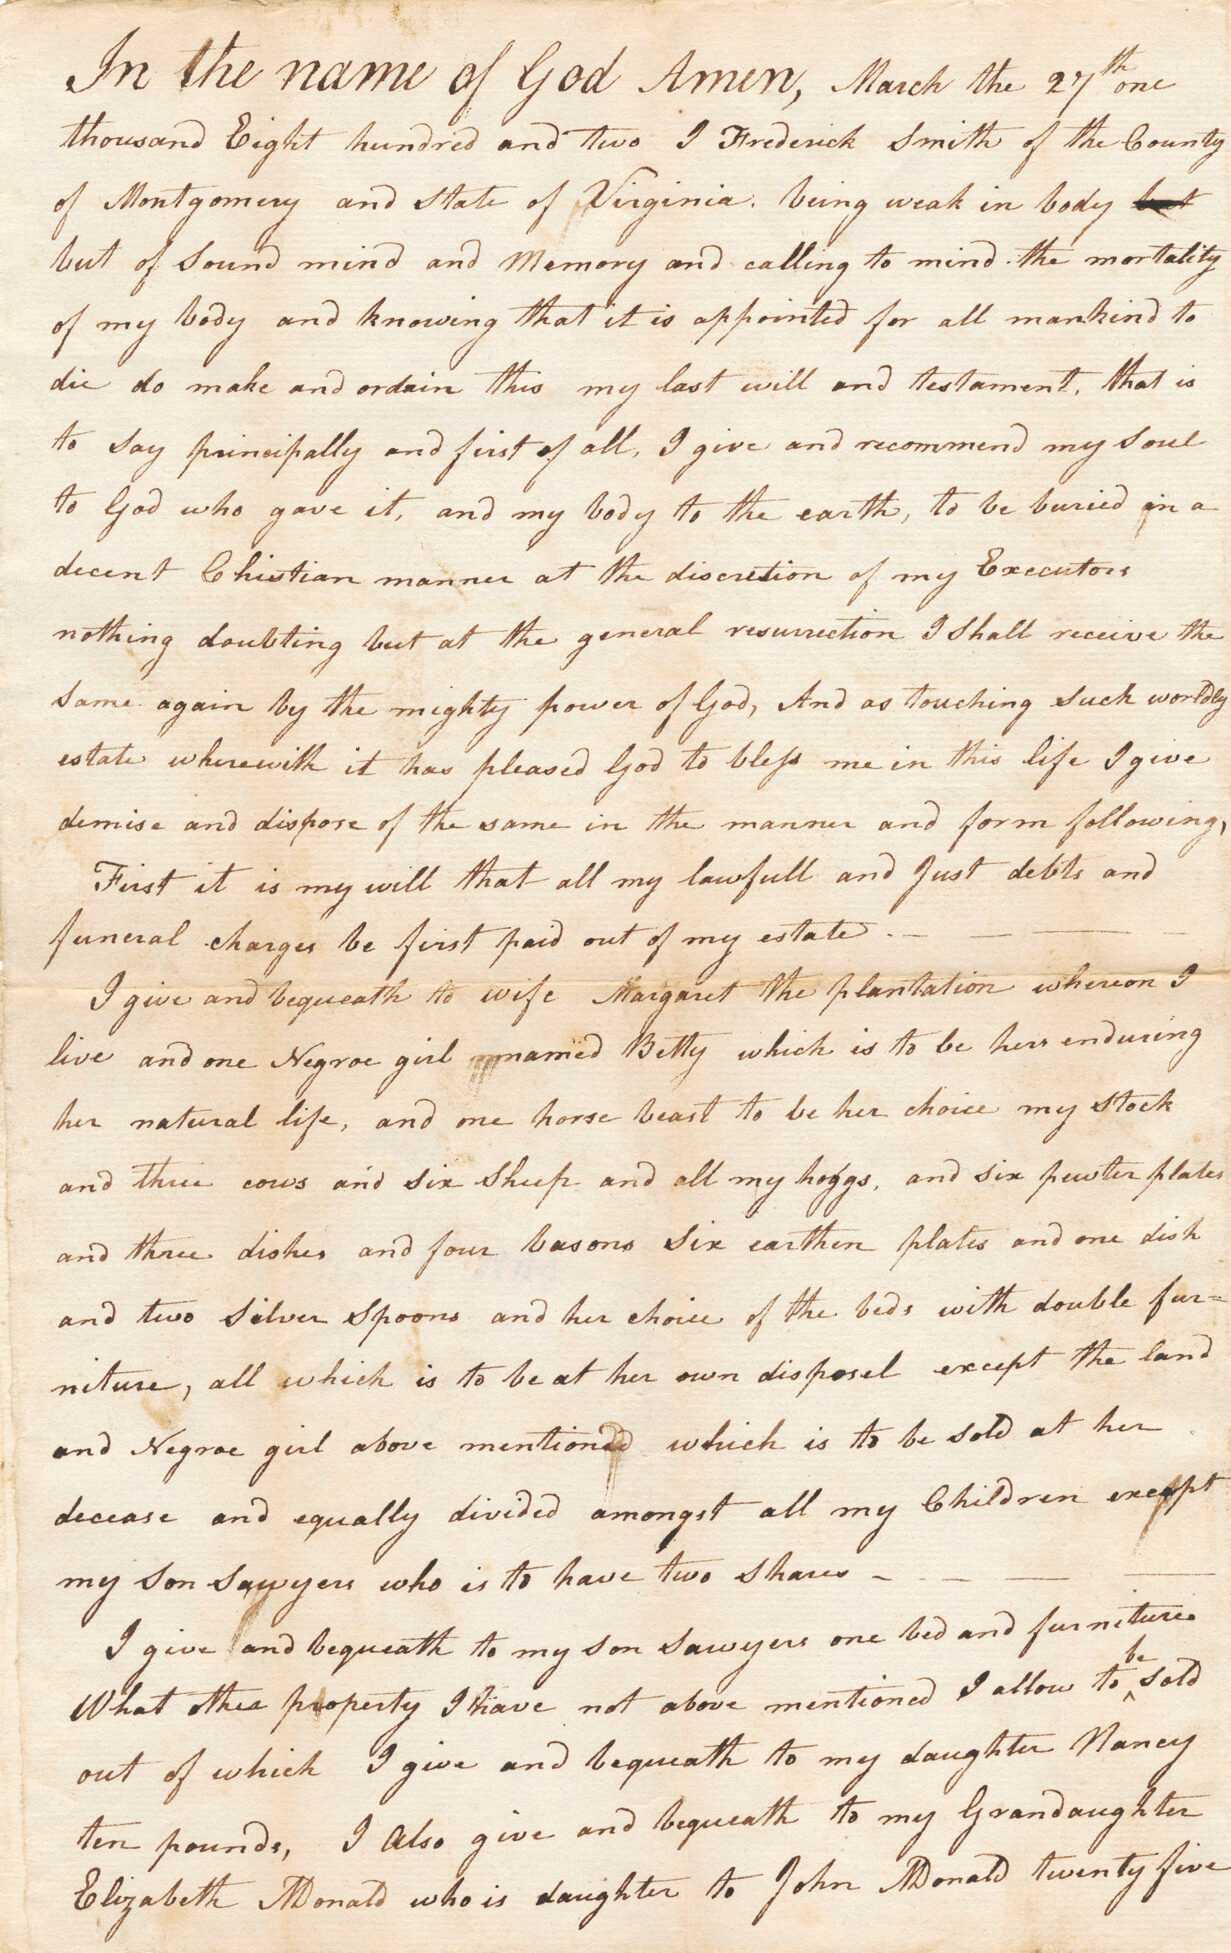 The handwritten will of Frederick Smith of Mongtomery County, Viriginia, dated March 27, 1802, in which he bequeaths to his wife Margaret an enslaved girl named Betty, along with a list of other possessions. The document consists of black ink on both sides of a single sheet of off-white paper. The will reads in part: "I give and bequeath to wife Margaret the plantation whereon I live and one negro girl named Betty which is to be hers enduring her natural life, and one horse beast to be her choice my stock and three cows and six sheep and all my hoggs [sic], and six pewter plates and three dishes and four basons [sic] Six earthen plates and one dish and two silver spoons and her choice of the beds with double furniture, all which is to be at her own disposal except the land and Negroe [sic] girl above mentioned which is to be sold at her decease and equally divided amongst all my children except my son Sawyer who is to have two shares." The document is signed with handwritten seal at bottom right of the verso: [Frederick Smyth] and at left is signed by four witnesses: [Sauol Gouder (?) / Penny Hans / Peter Coon/ George Monald].